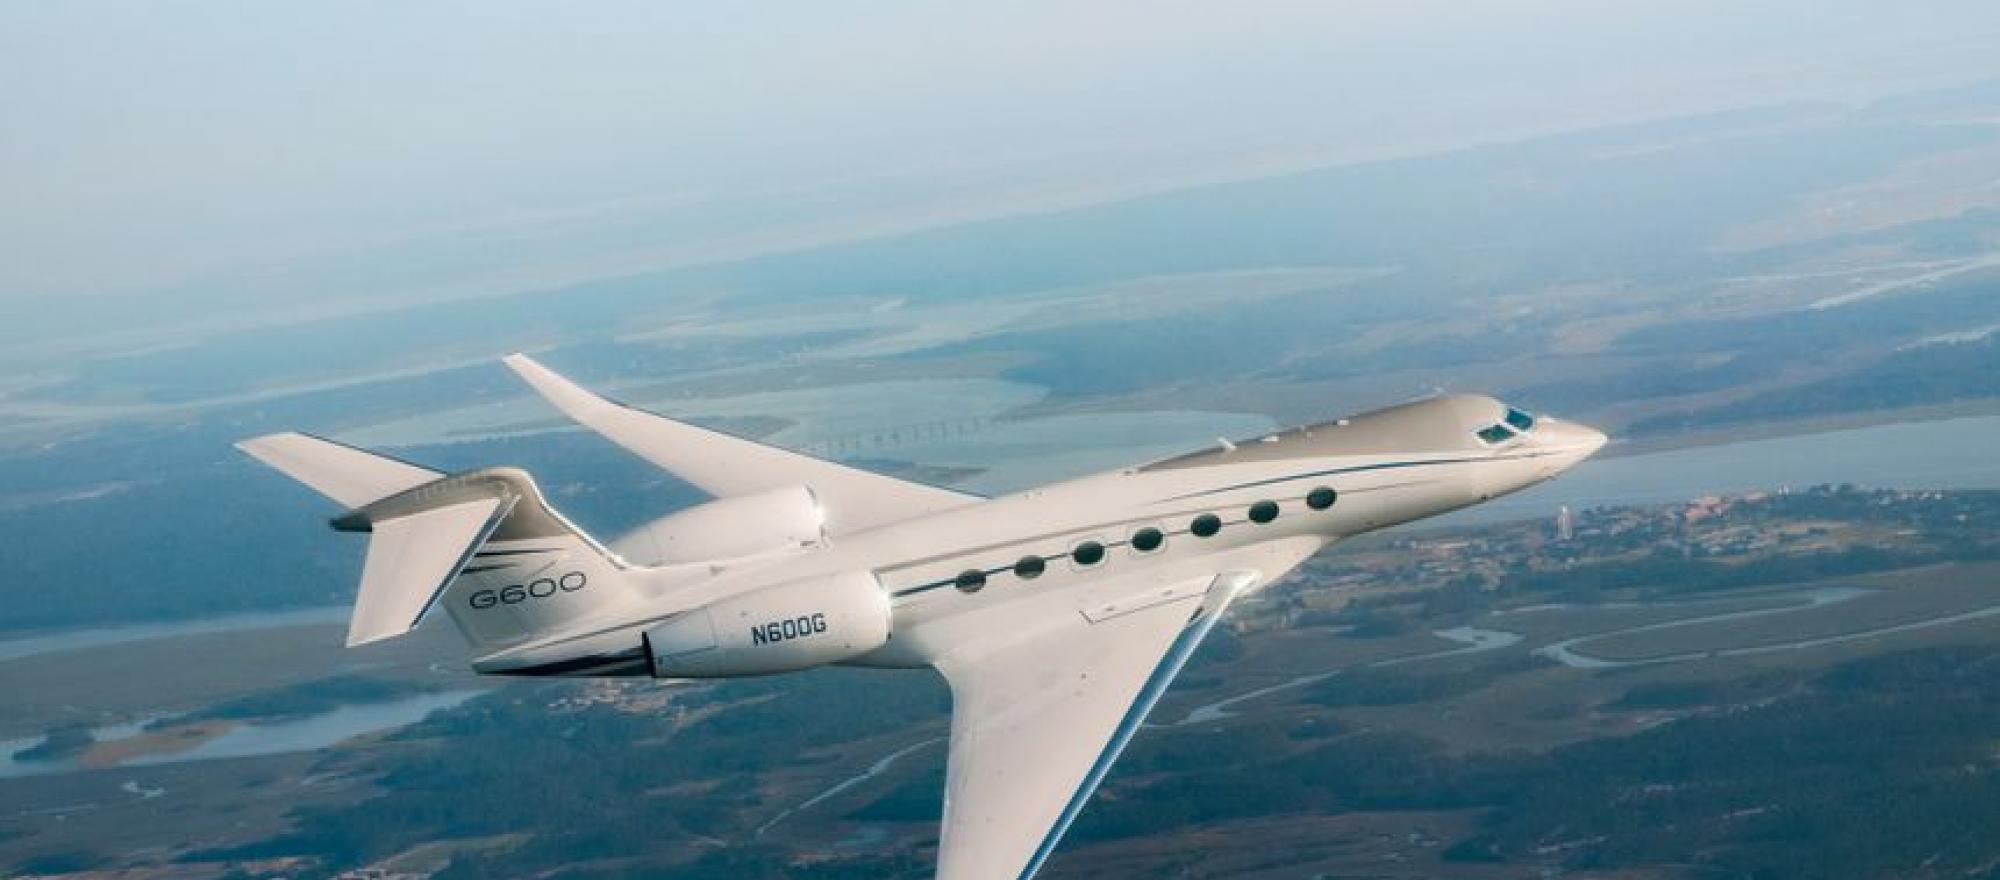 The G600 is anticipated to be certified later this year.